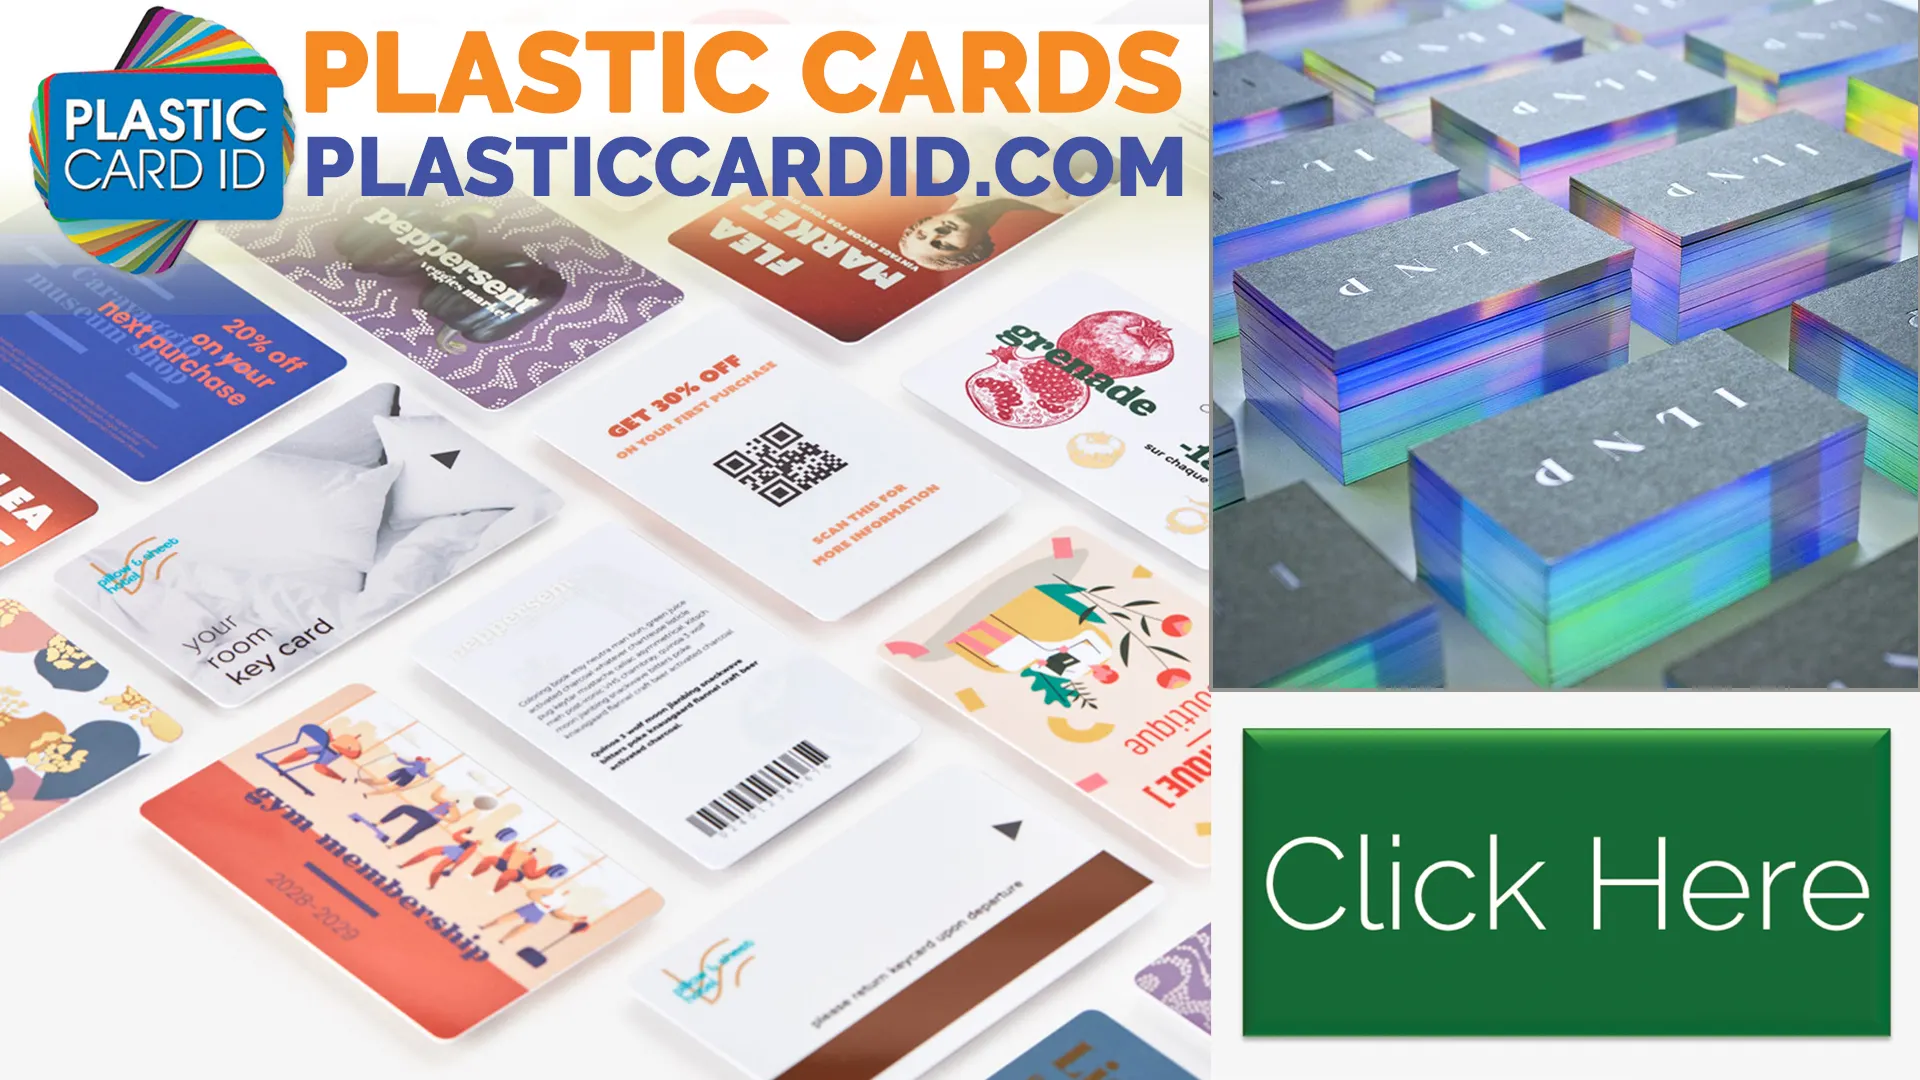 Investing in Quality Plastic Cards: The Long-Term ROI That Benefits You